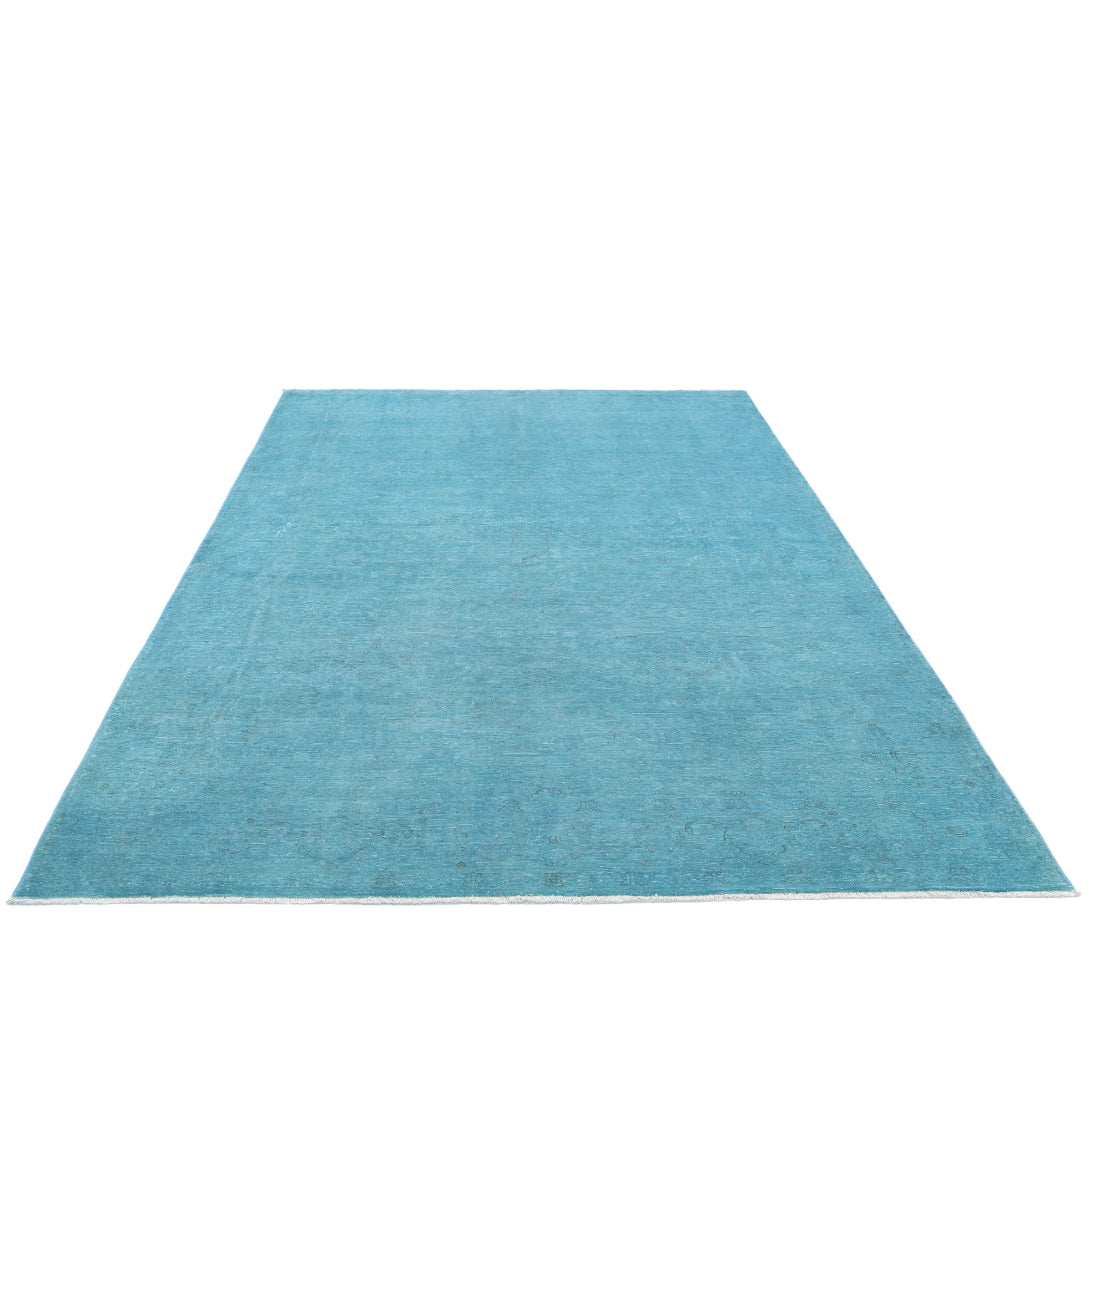 Hand Knotted Overdye Wool Rug - 6'9'' x 9'9'' 6'9'' x 9'9'' (203 X 293) / Teal / Teal